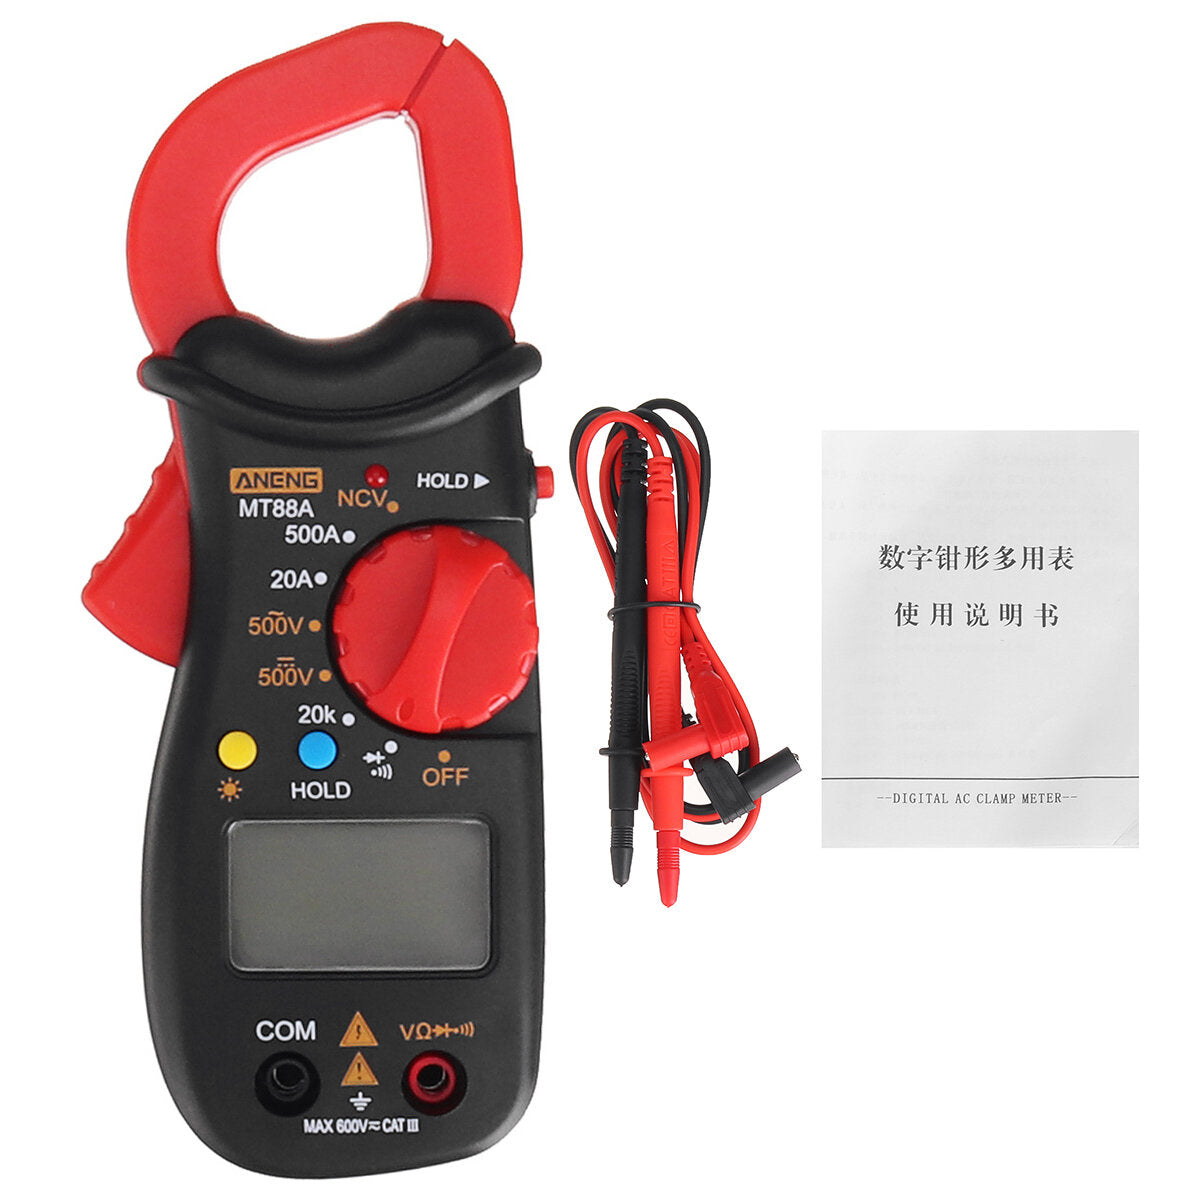 aneng mt88a digitale stroomtang multimeter dc / ac spanning ac huidige tester frequentie capaciteit ncv tester meetinstrument